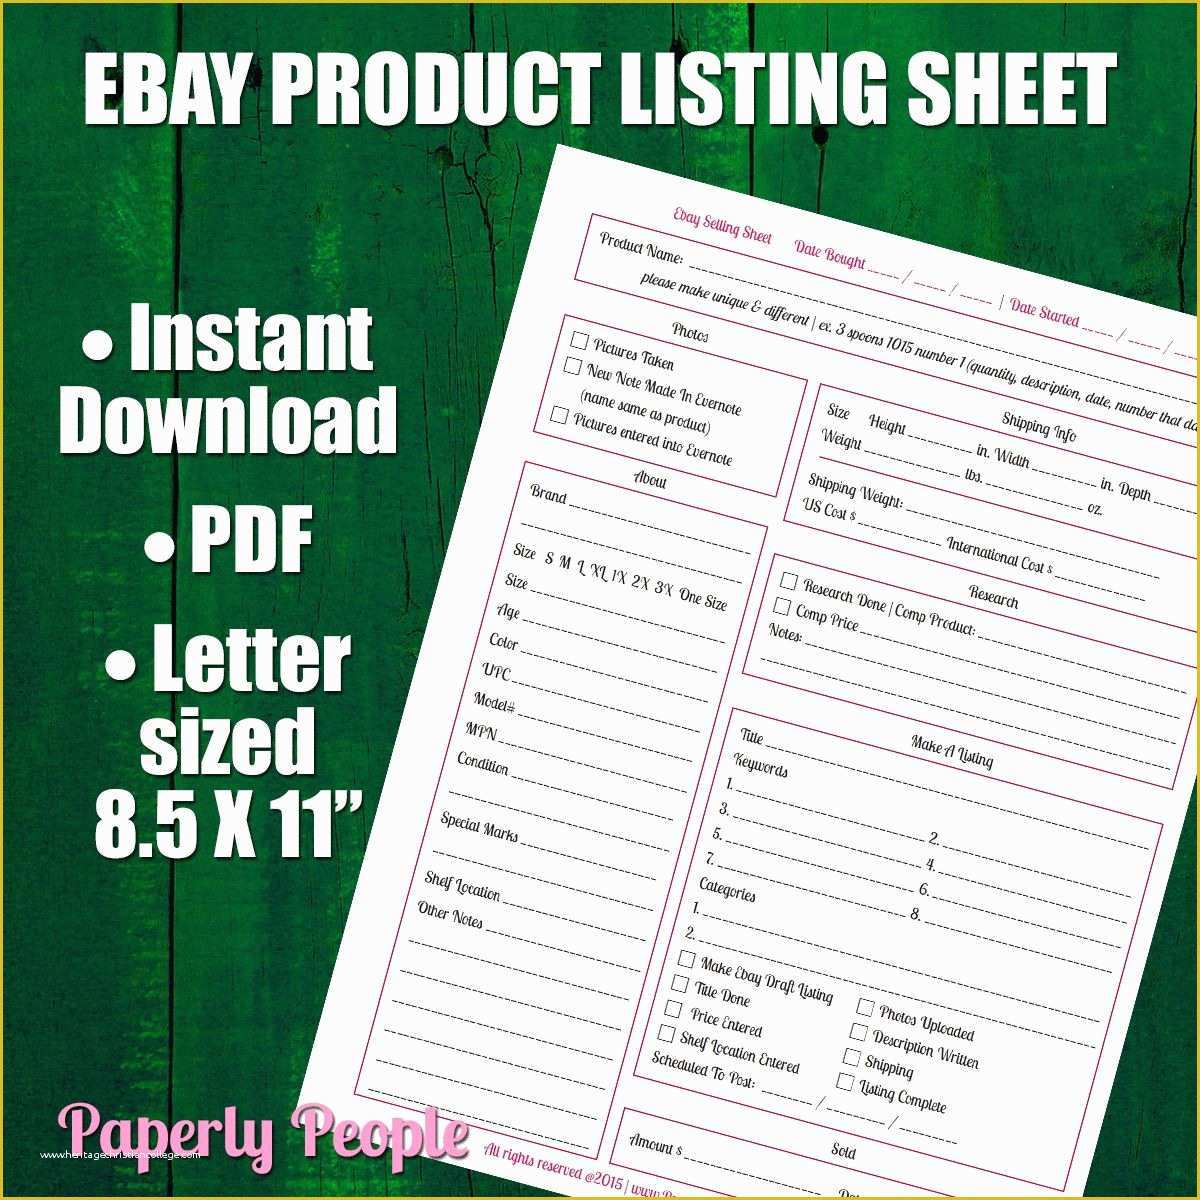 Listing Templates for Ebay Free Of New to Paperlypeople On Etsy Ebay Products Listing Sheet